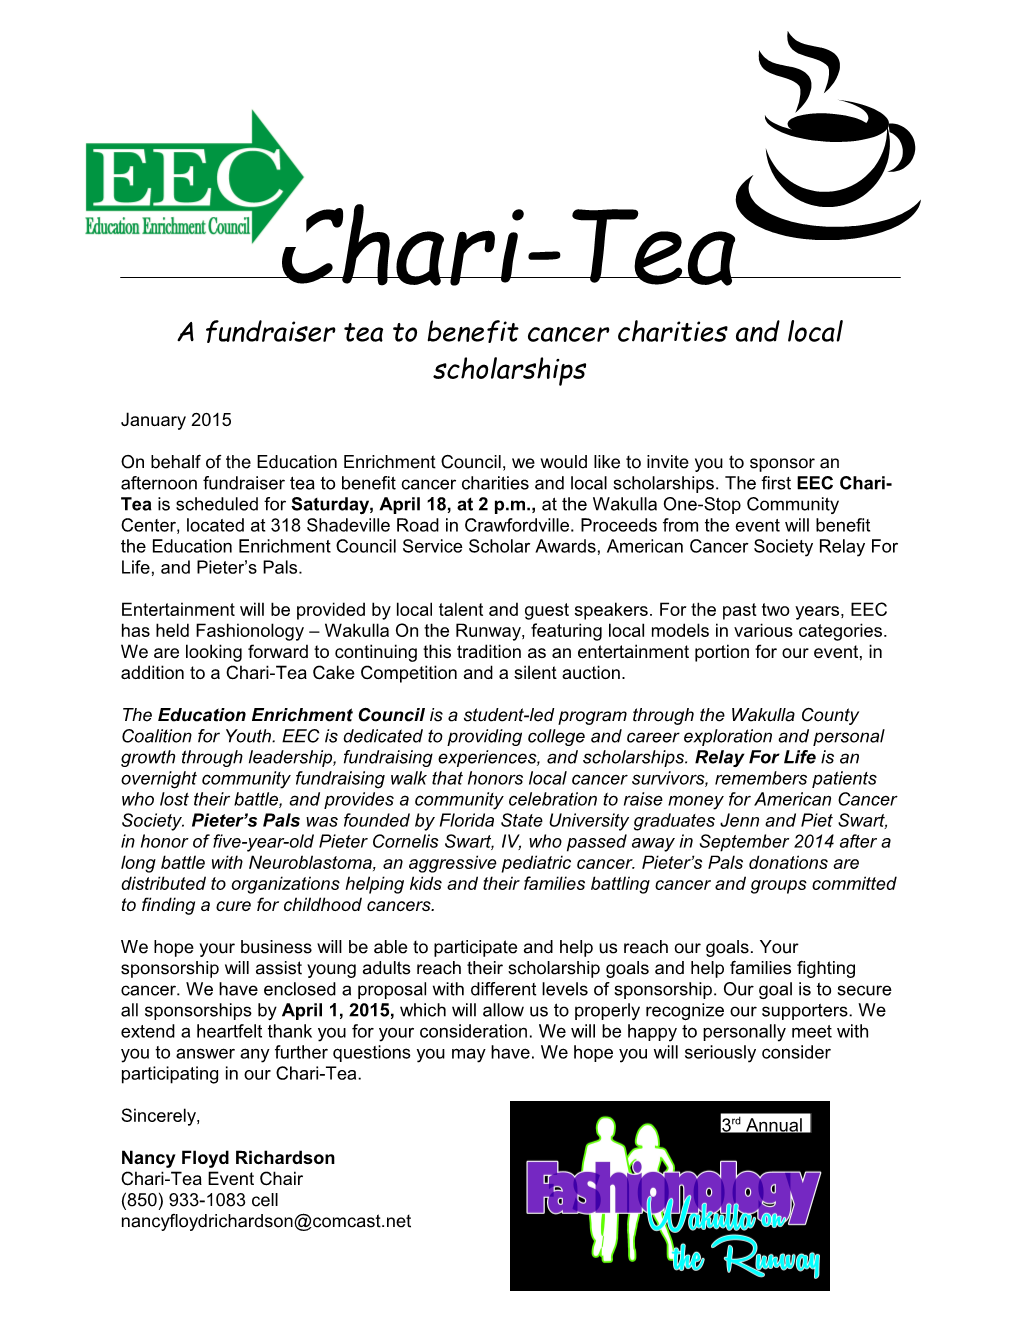 A Fundraiser Tea to Benefit Cancer Charities and Local Scholarships